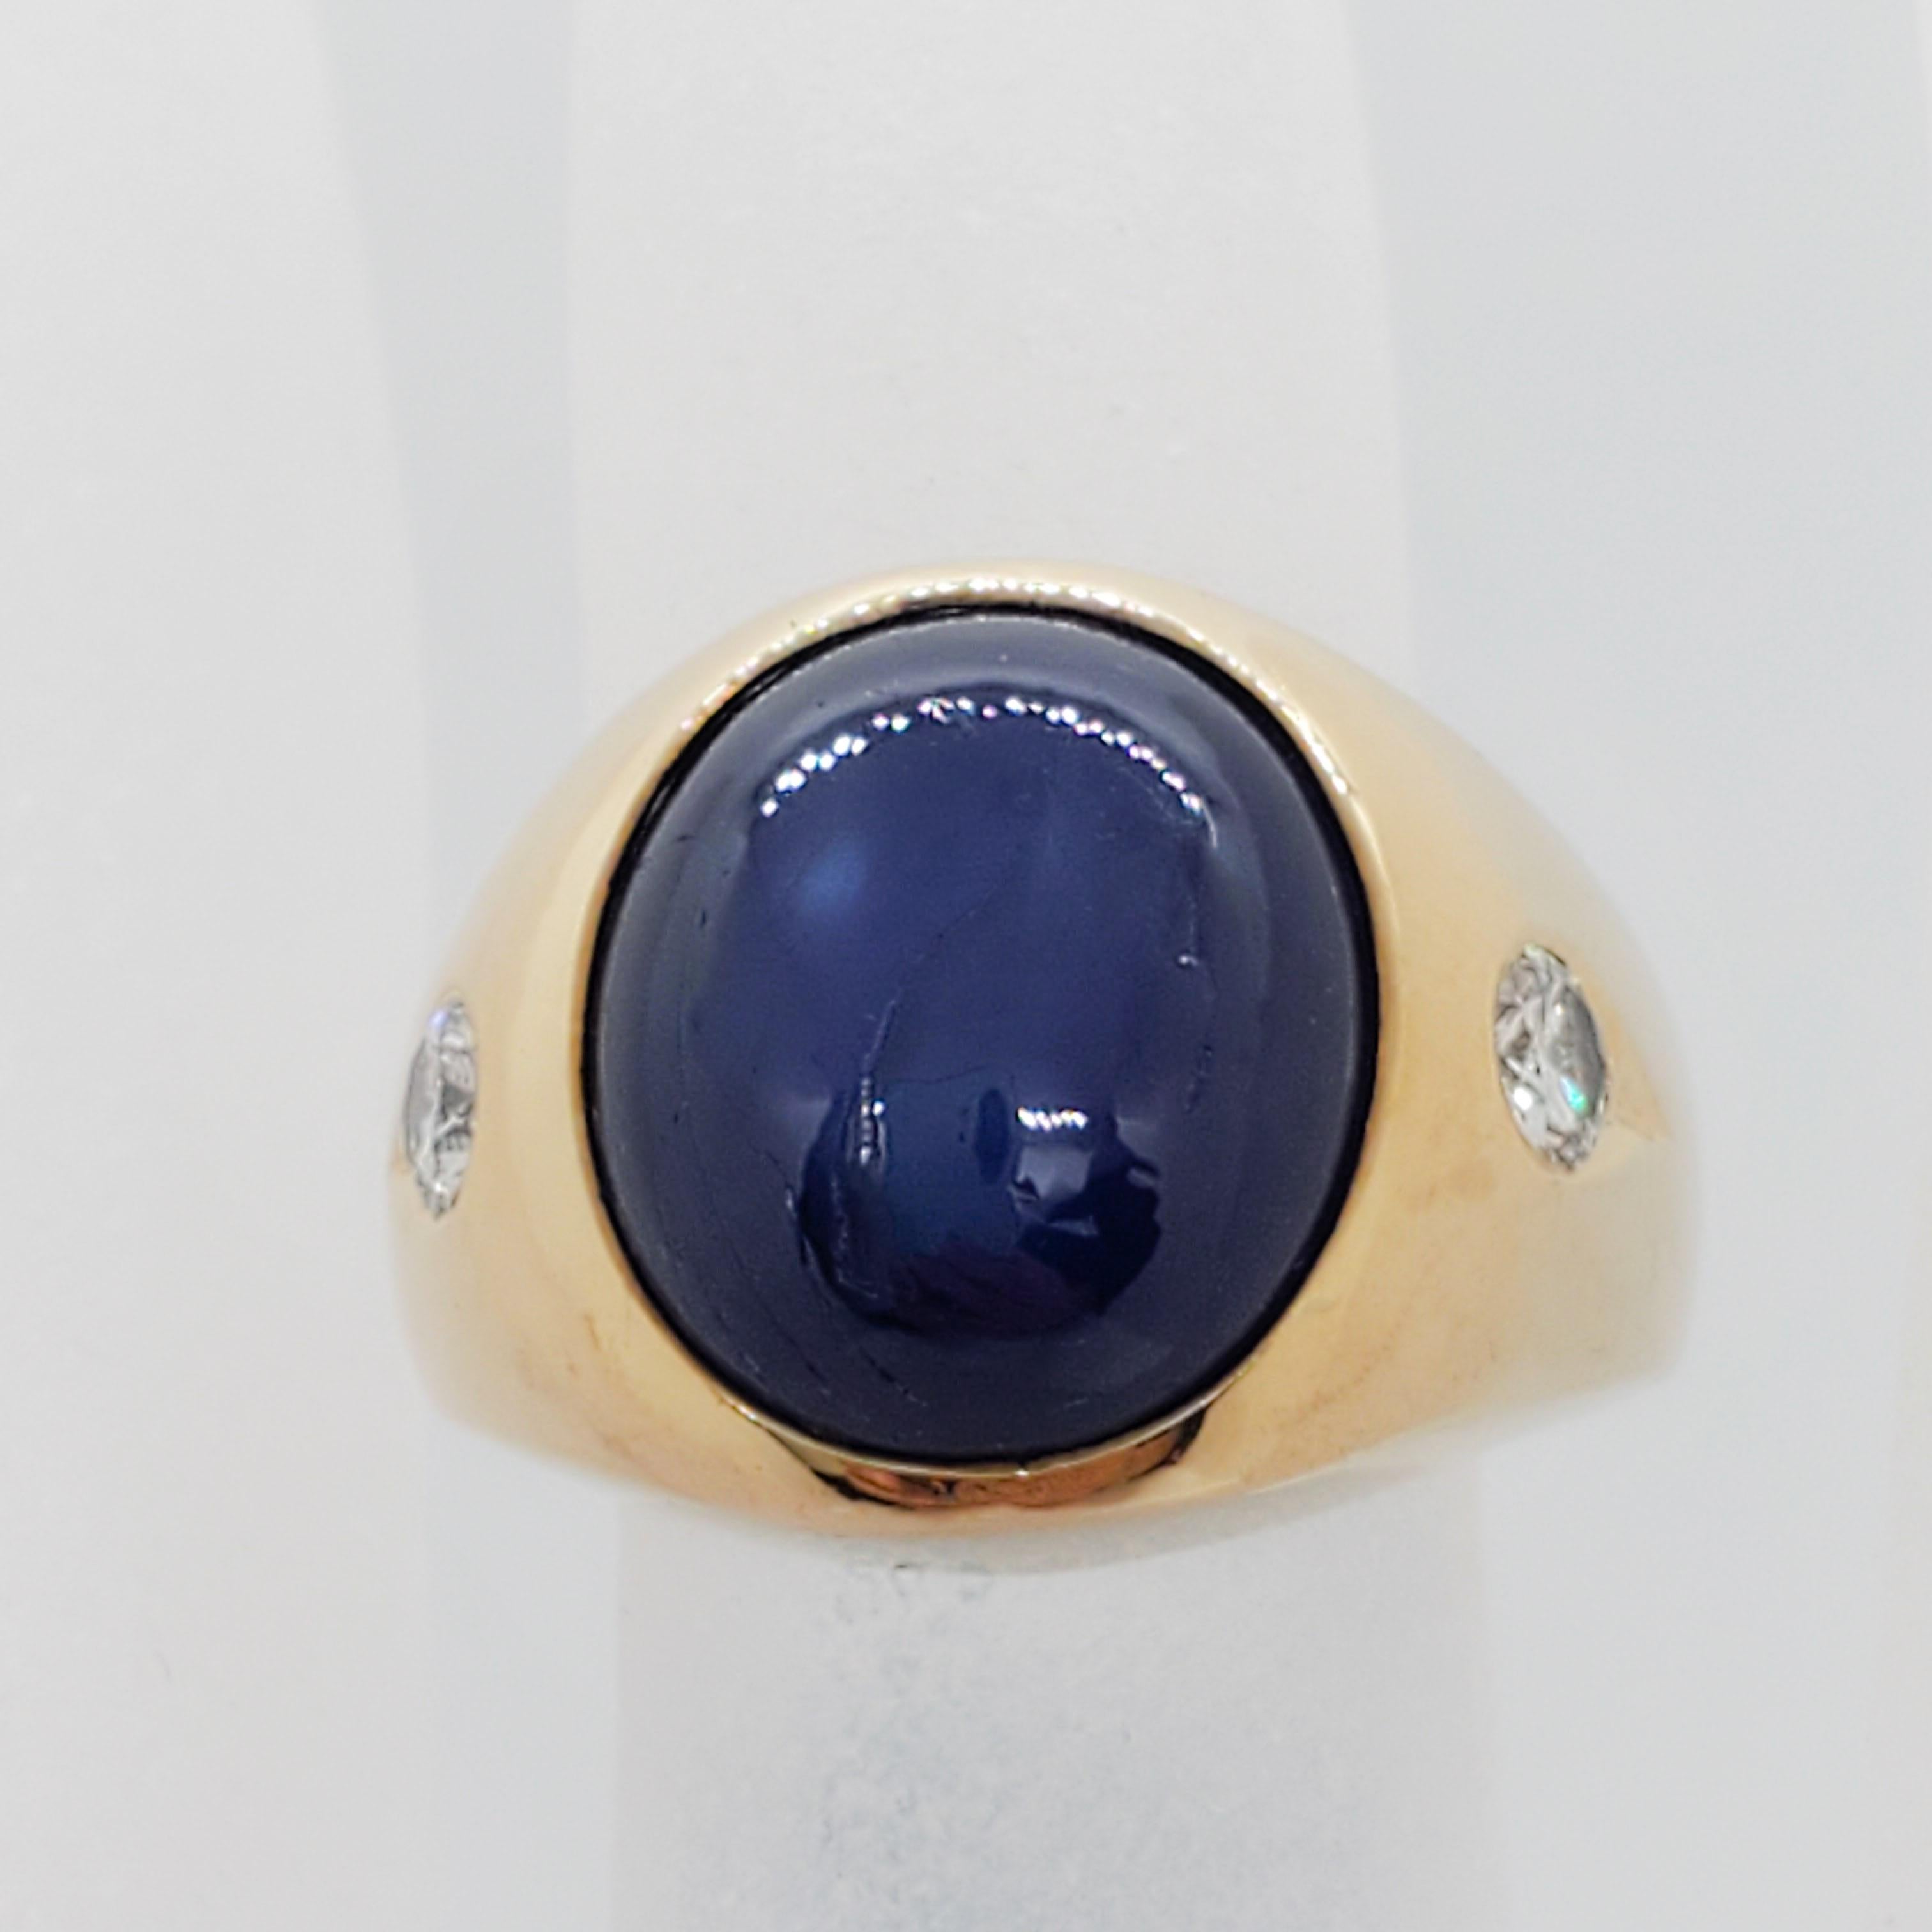 Beautiful deep blue sapphire oval cabochon weighing 8.50 cts with good quality, white, and bright diamond rounds weighing 0.25 cts.  Ring size is 6.5.  Handmade in 14k yellow gold.